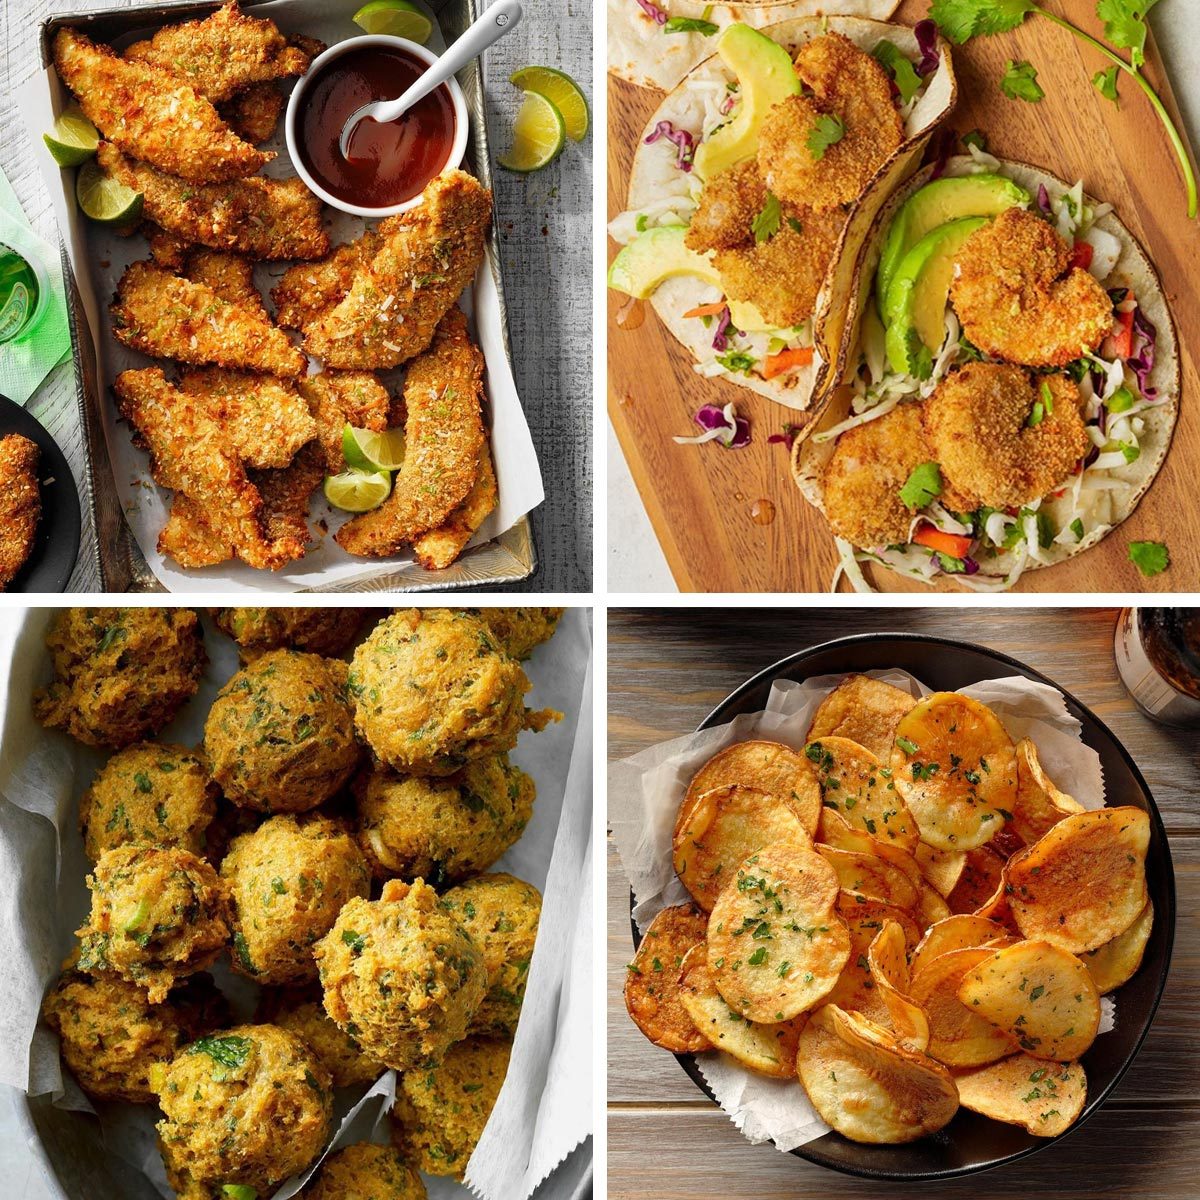 30 Best Healthy Air Fryer Recipes - Healthy Ideas for Air Frying